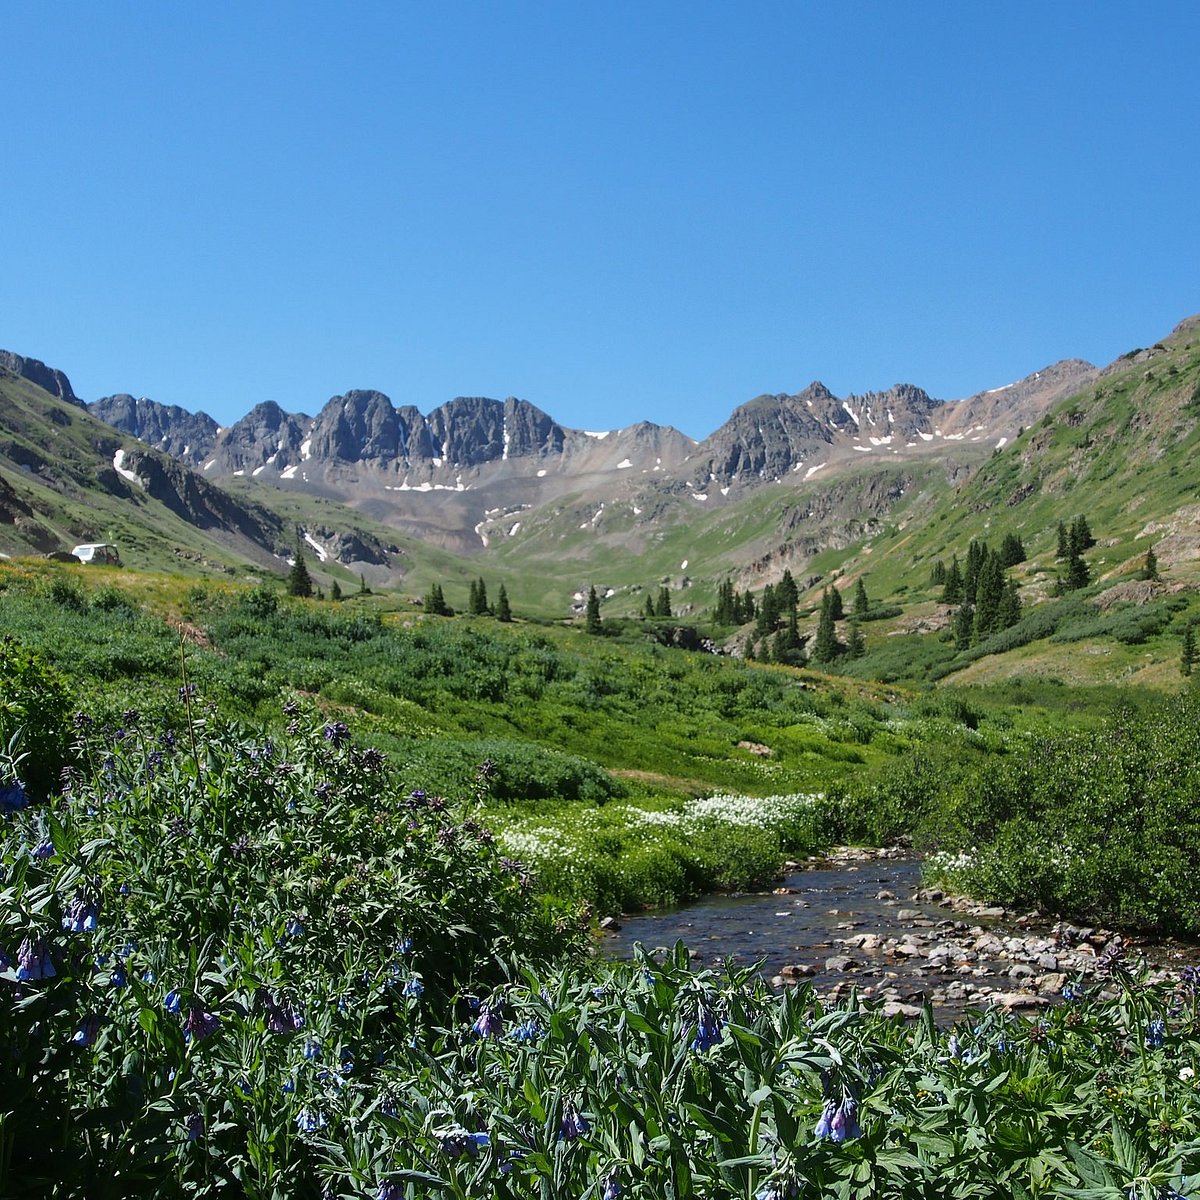 Camping on the Alpine Loop Colorado: An Epic Adventure Awaits!